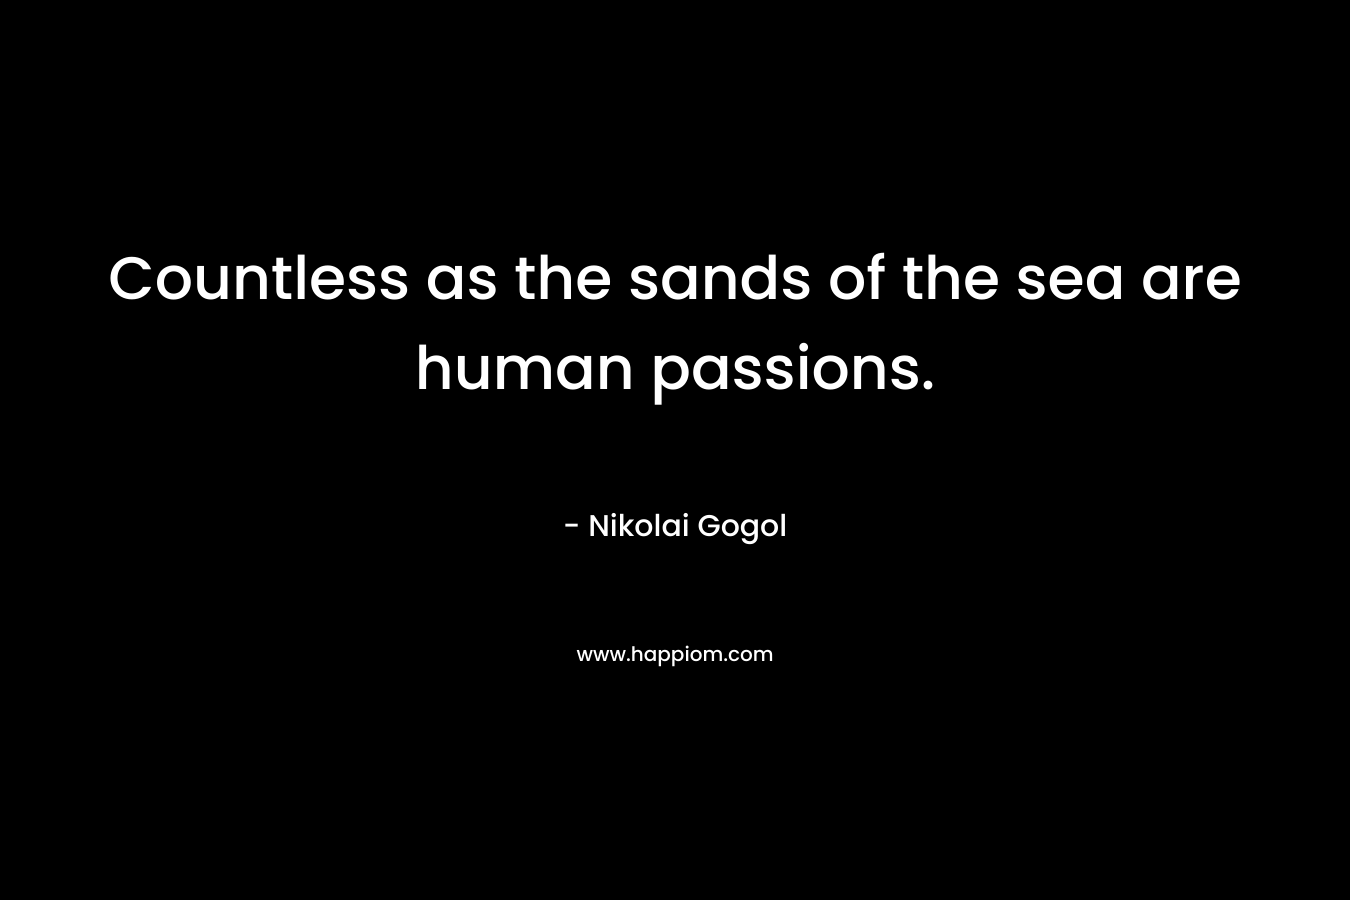 Countless as the sands of the sea are human passions. – Nikolai Gogol